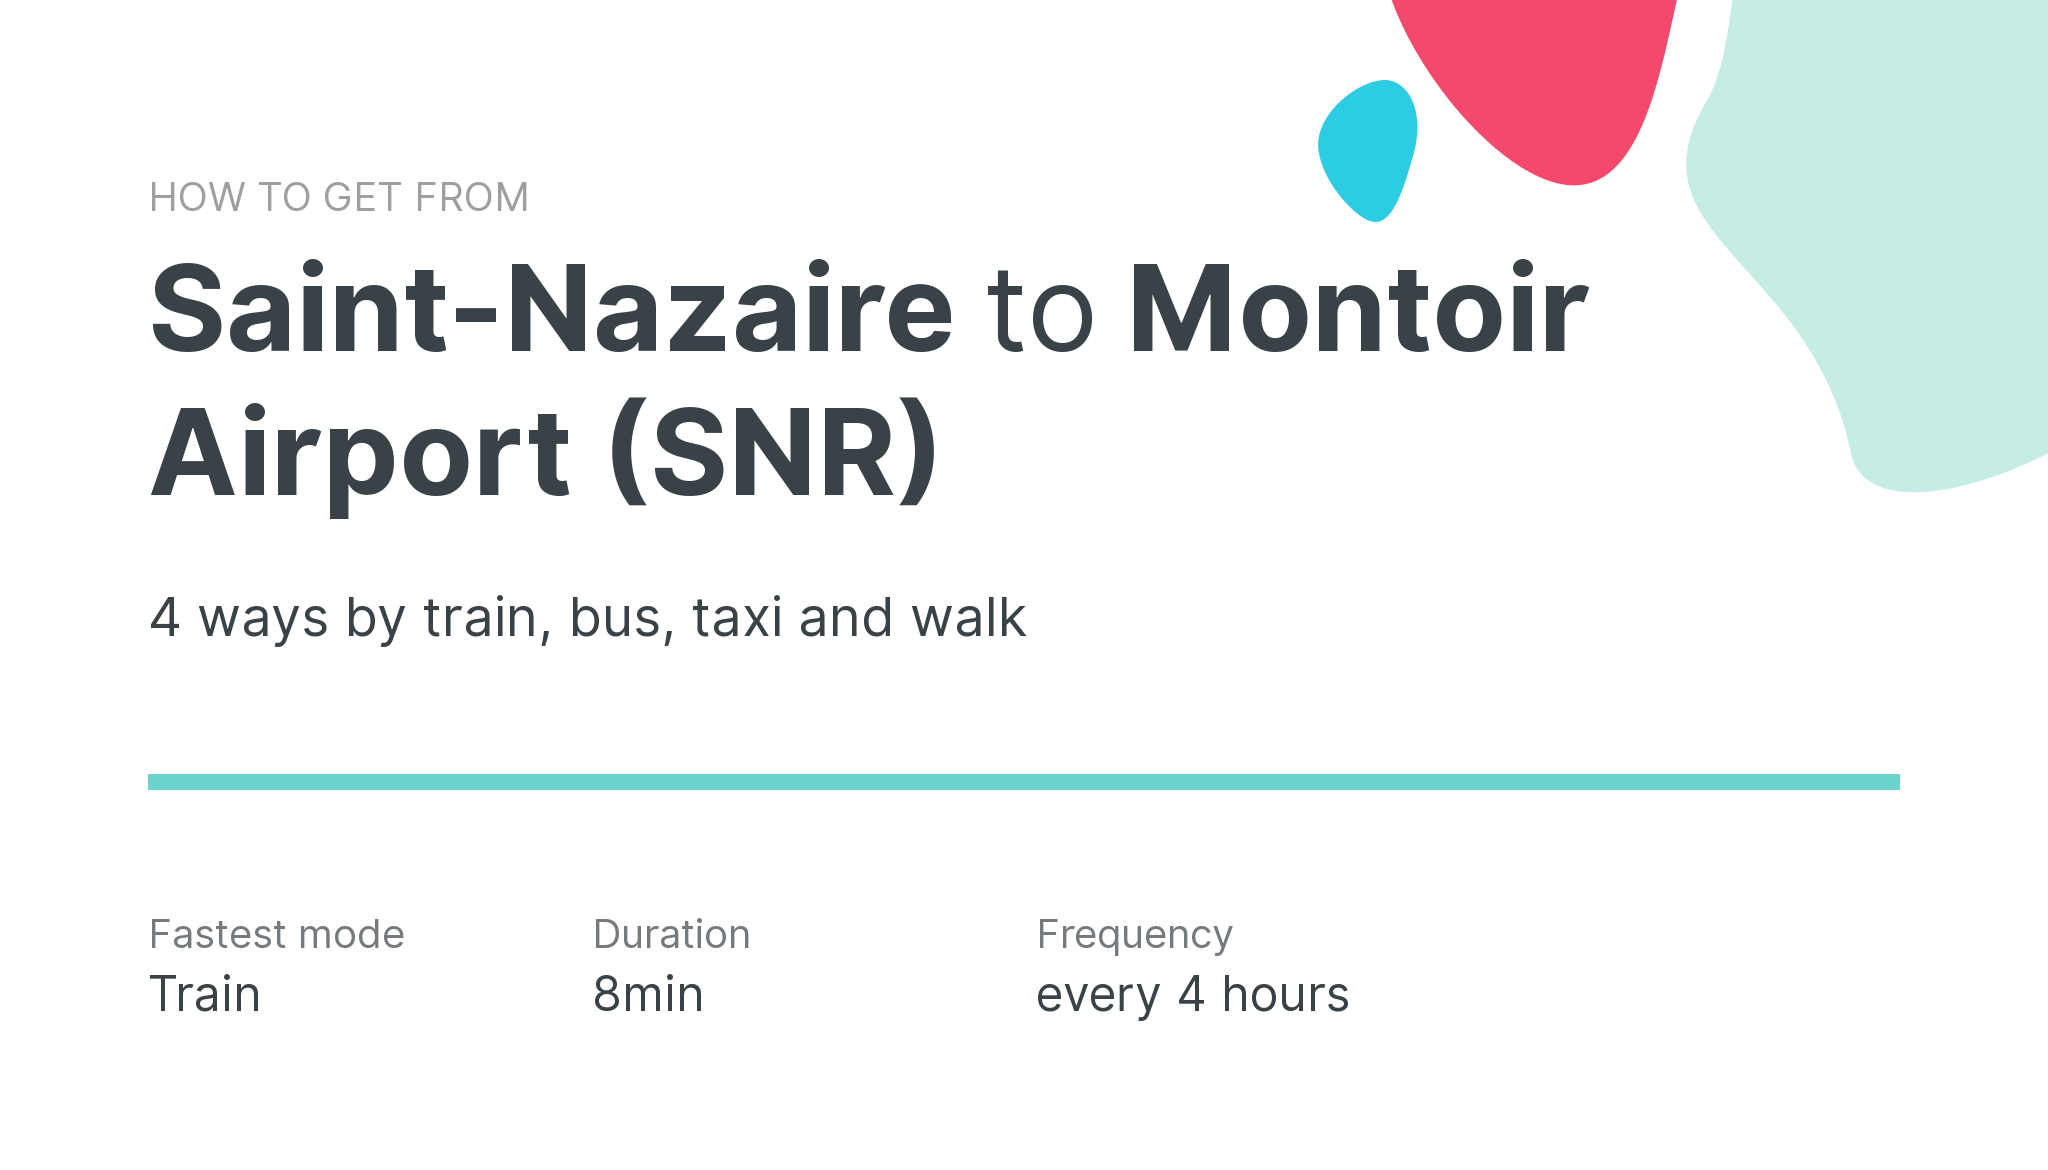 How do I get from Saint-Nazaire to Montoir Airport (SNR)